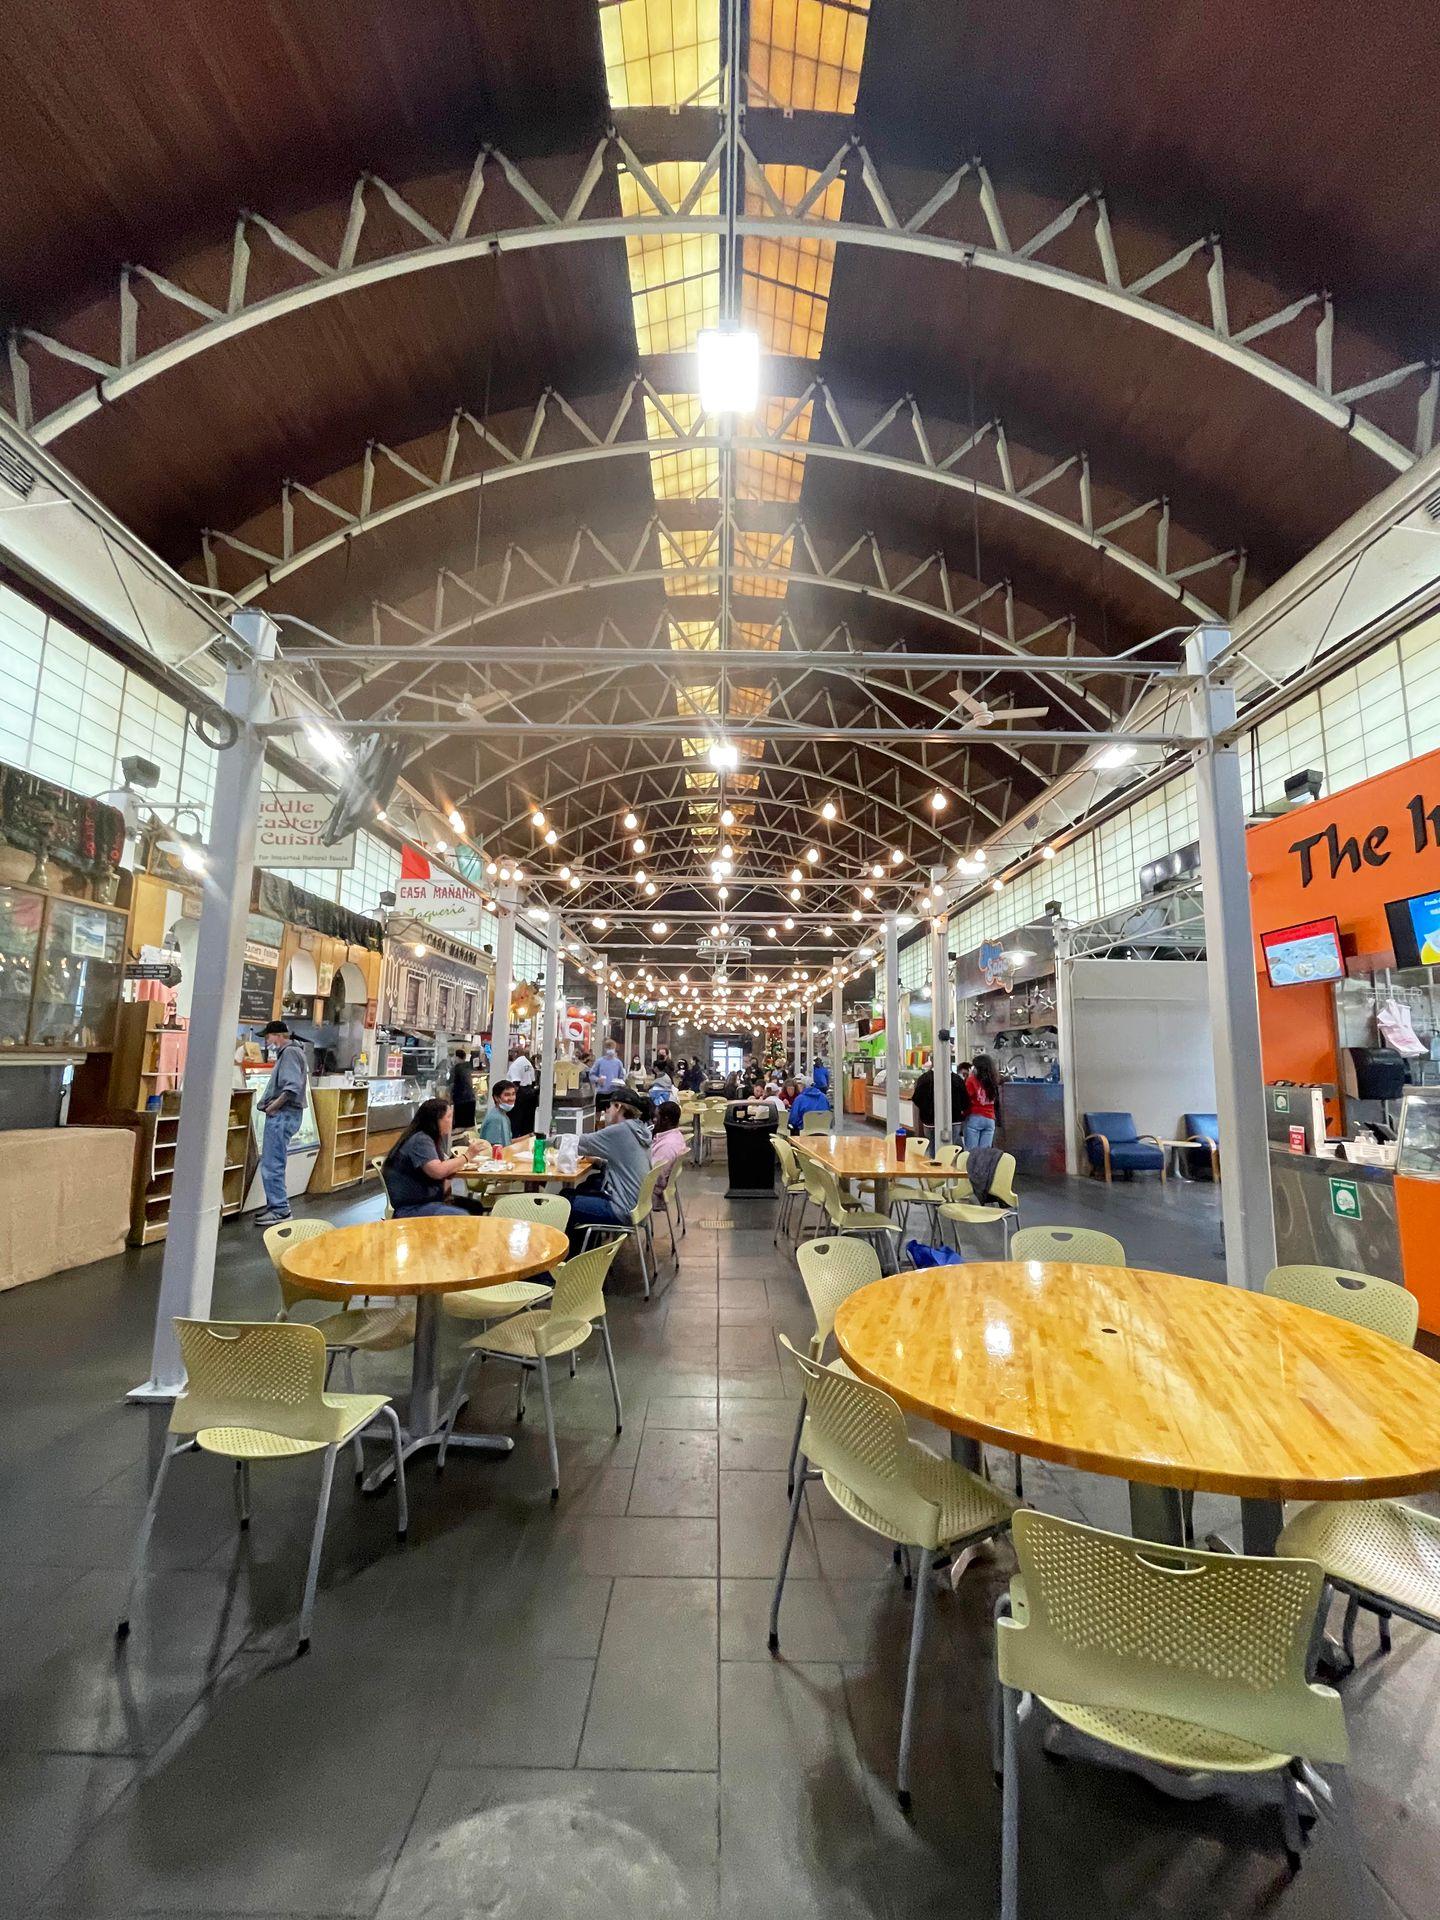 The inside of the Little Rock River Market. There are tables in the center, food vendors on the sides and an arch in the ceiling above.